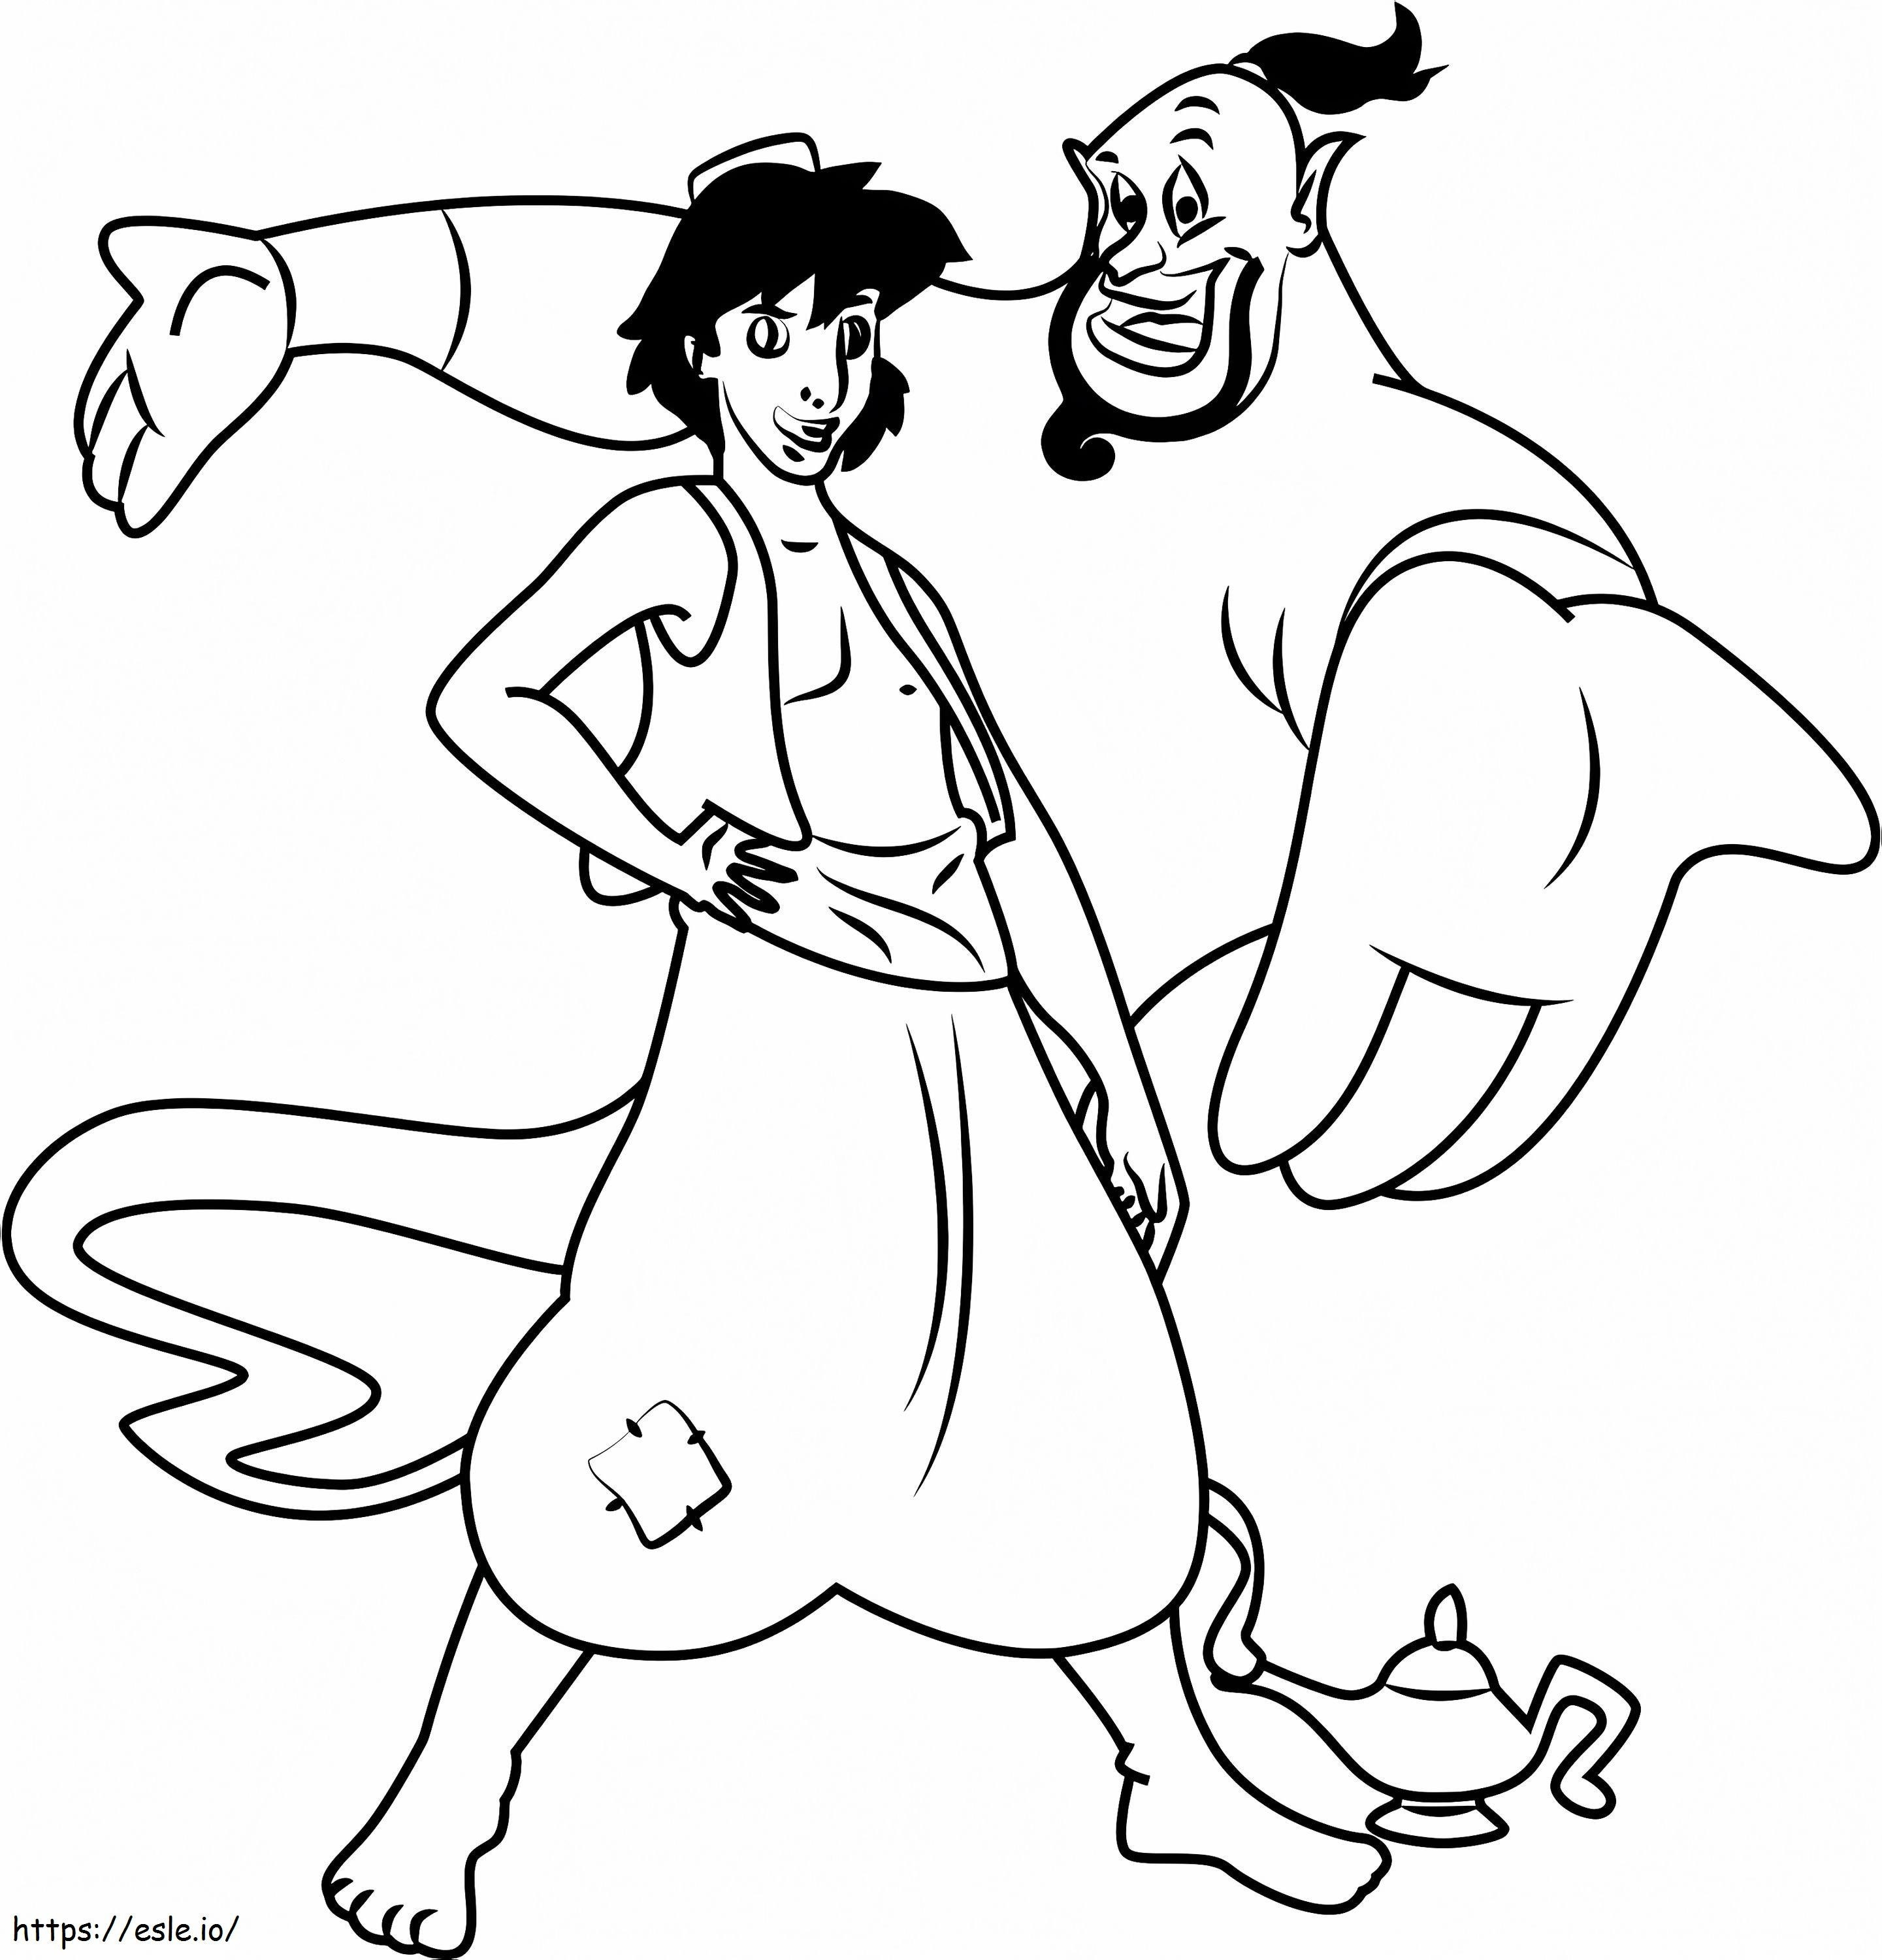 1532486888 Aladdin And Genie A4 coloring page